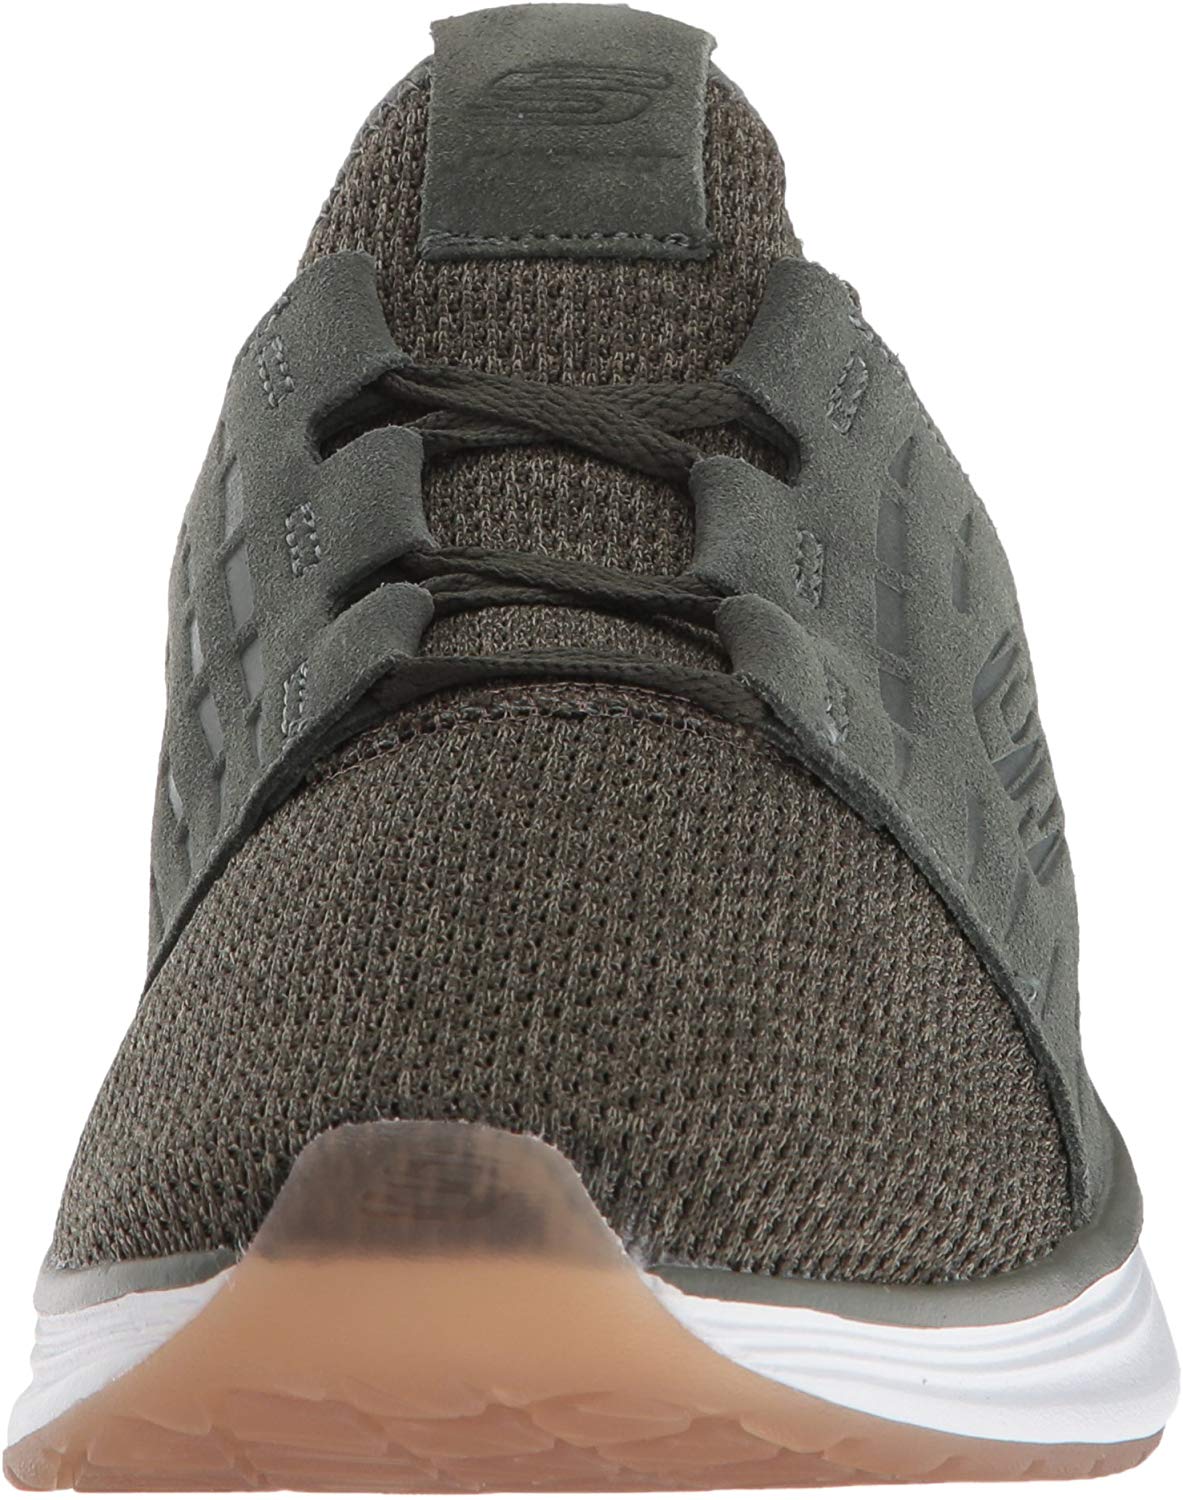 Skechers Mens 52967 Canvas Low Top Lace Up Fashion Sneakers, Olive ...